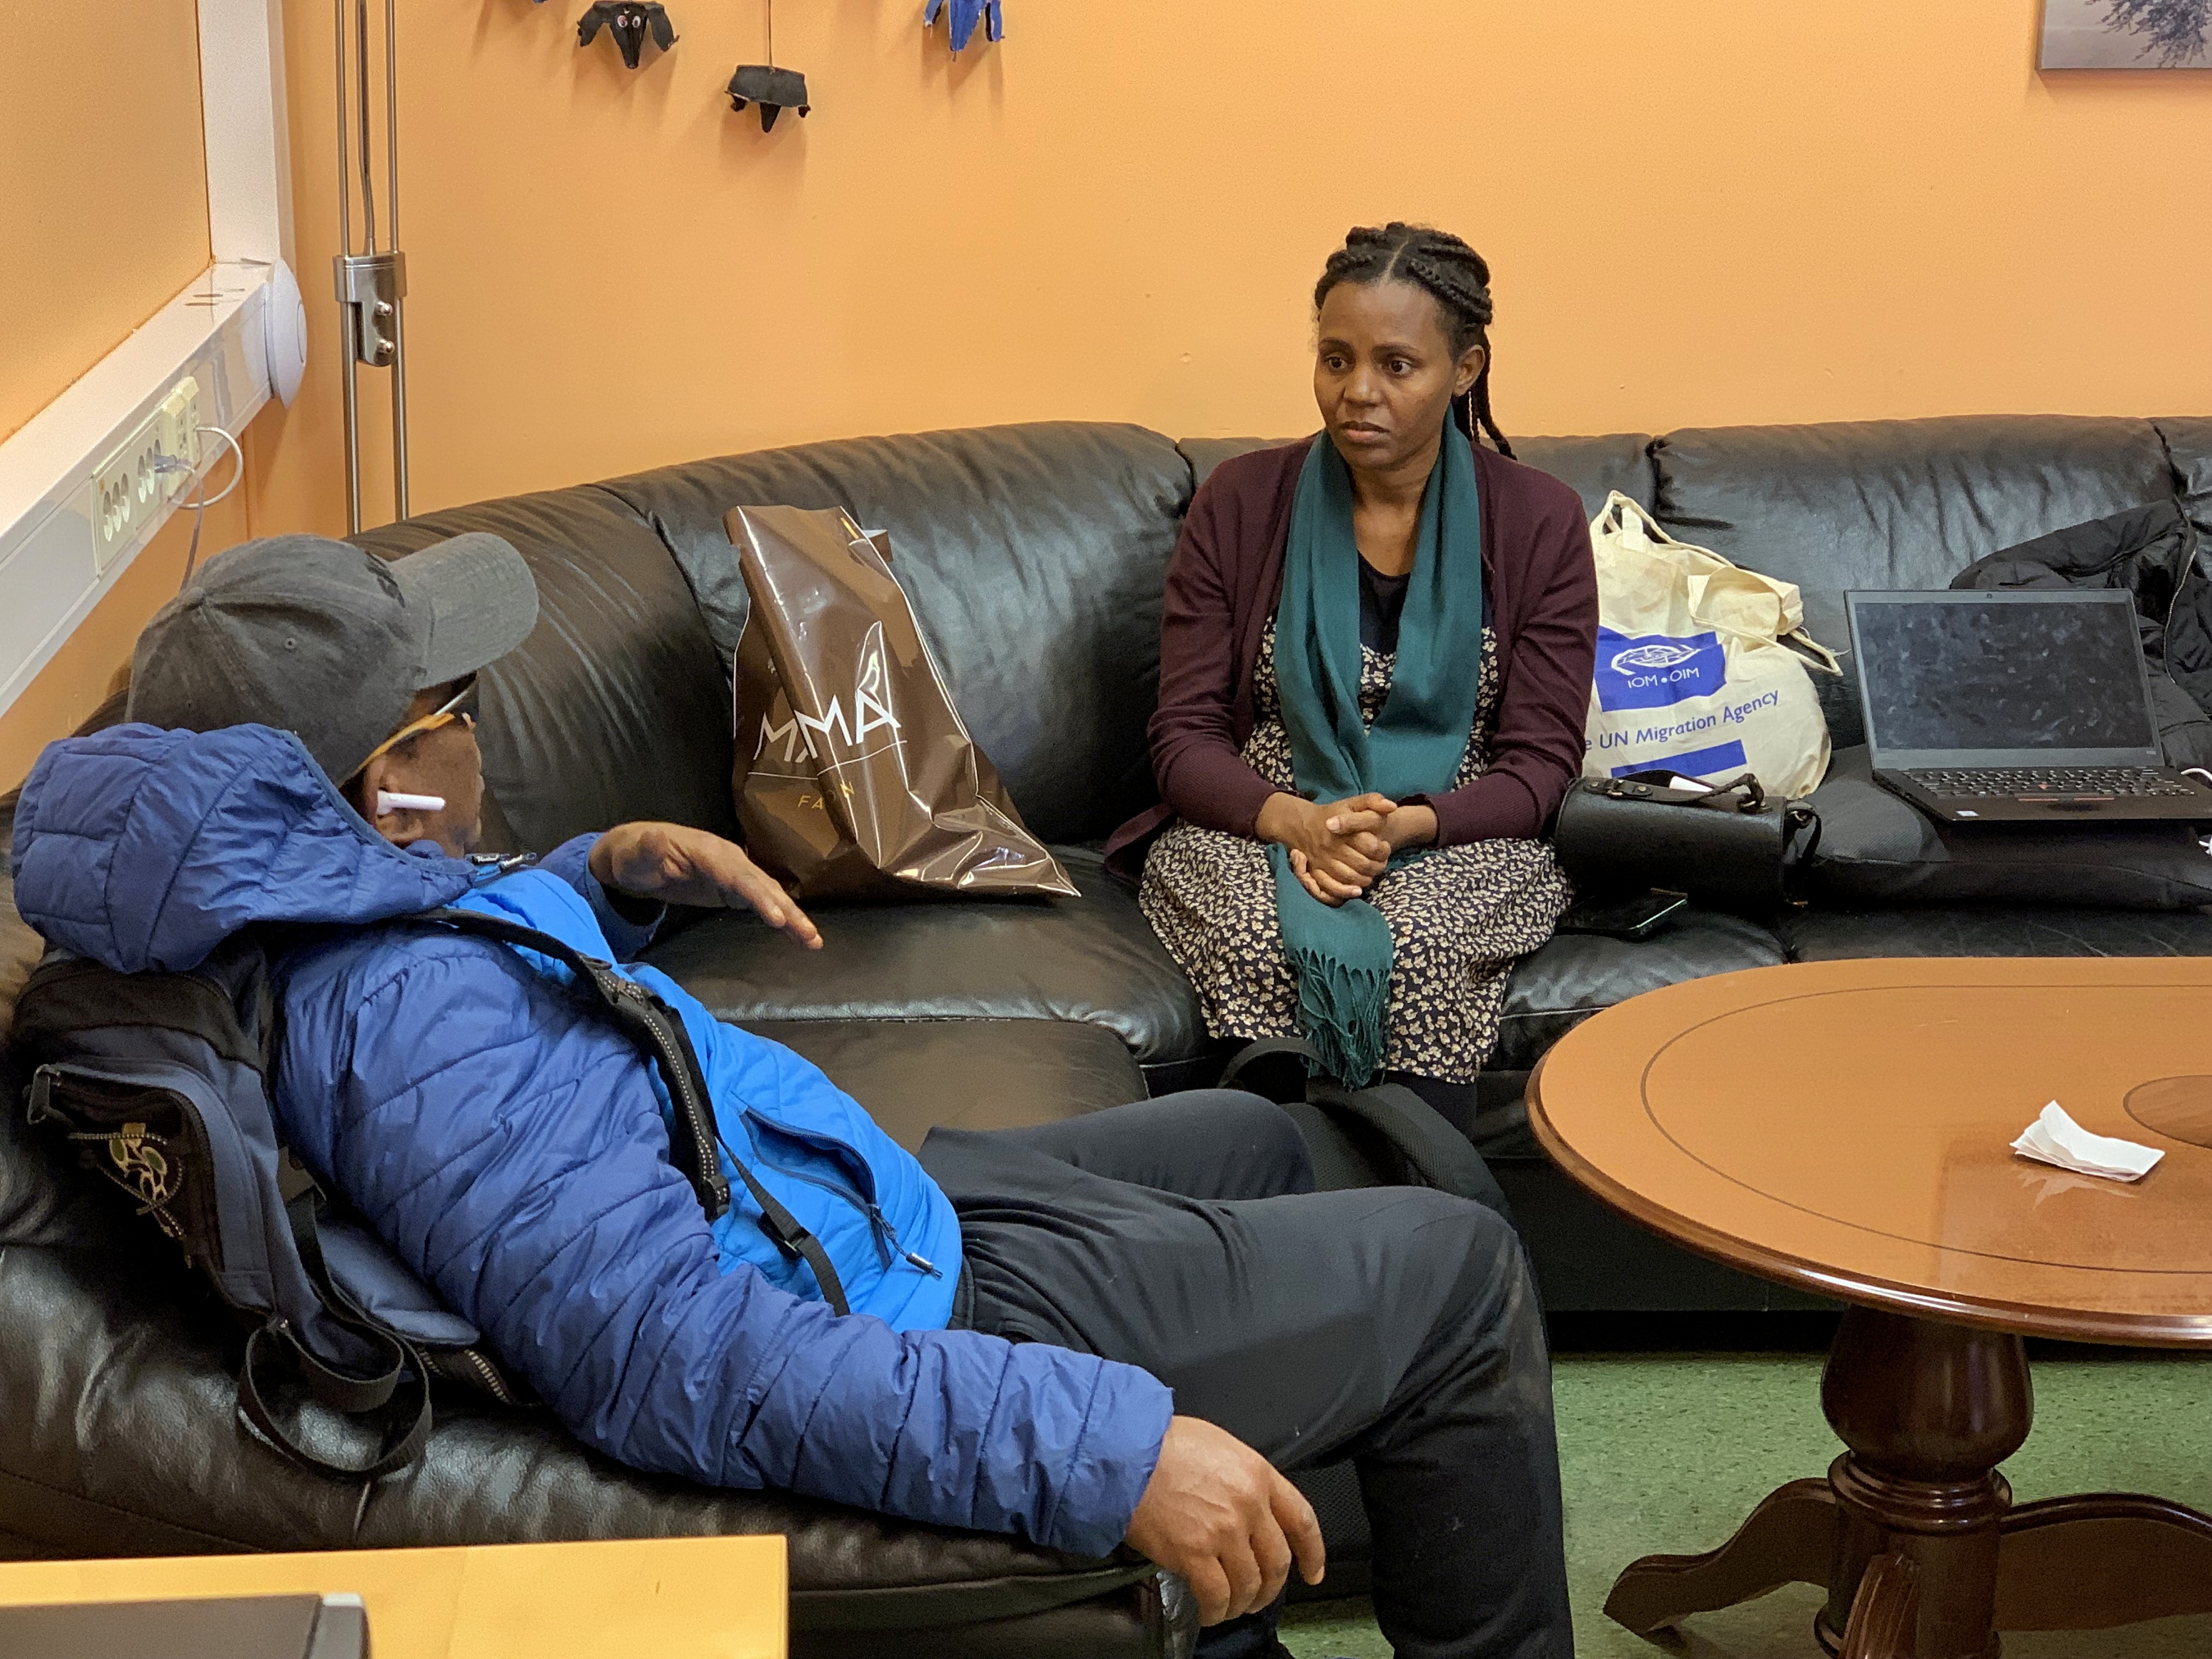  IOM Staff provides individual counselling to Ethiopian migrants seeking information